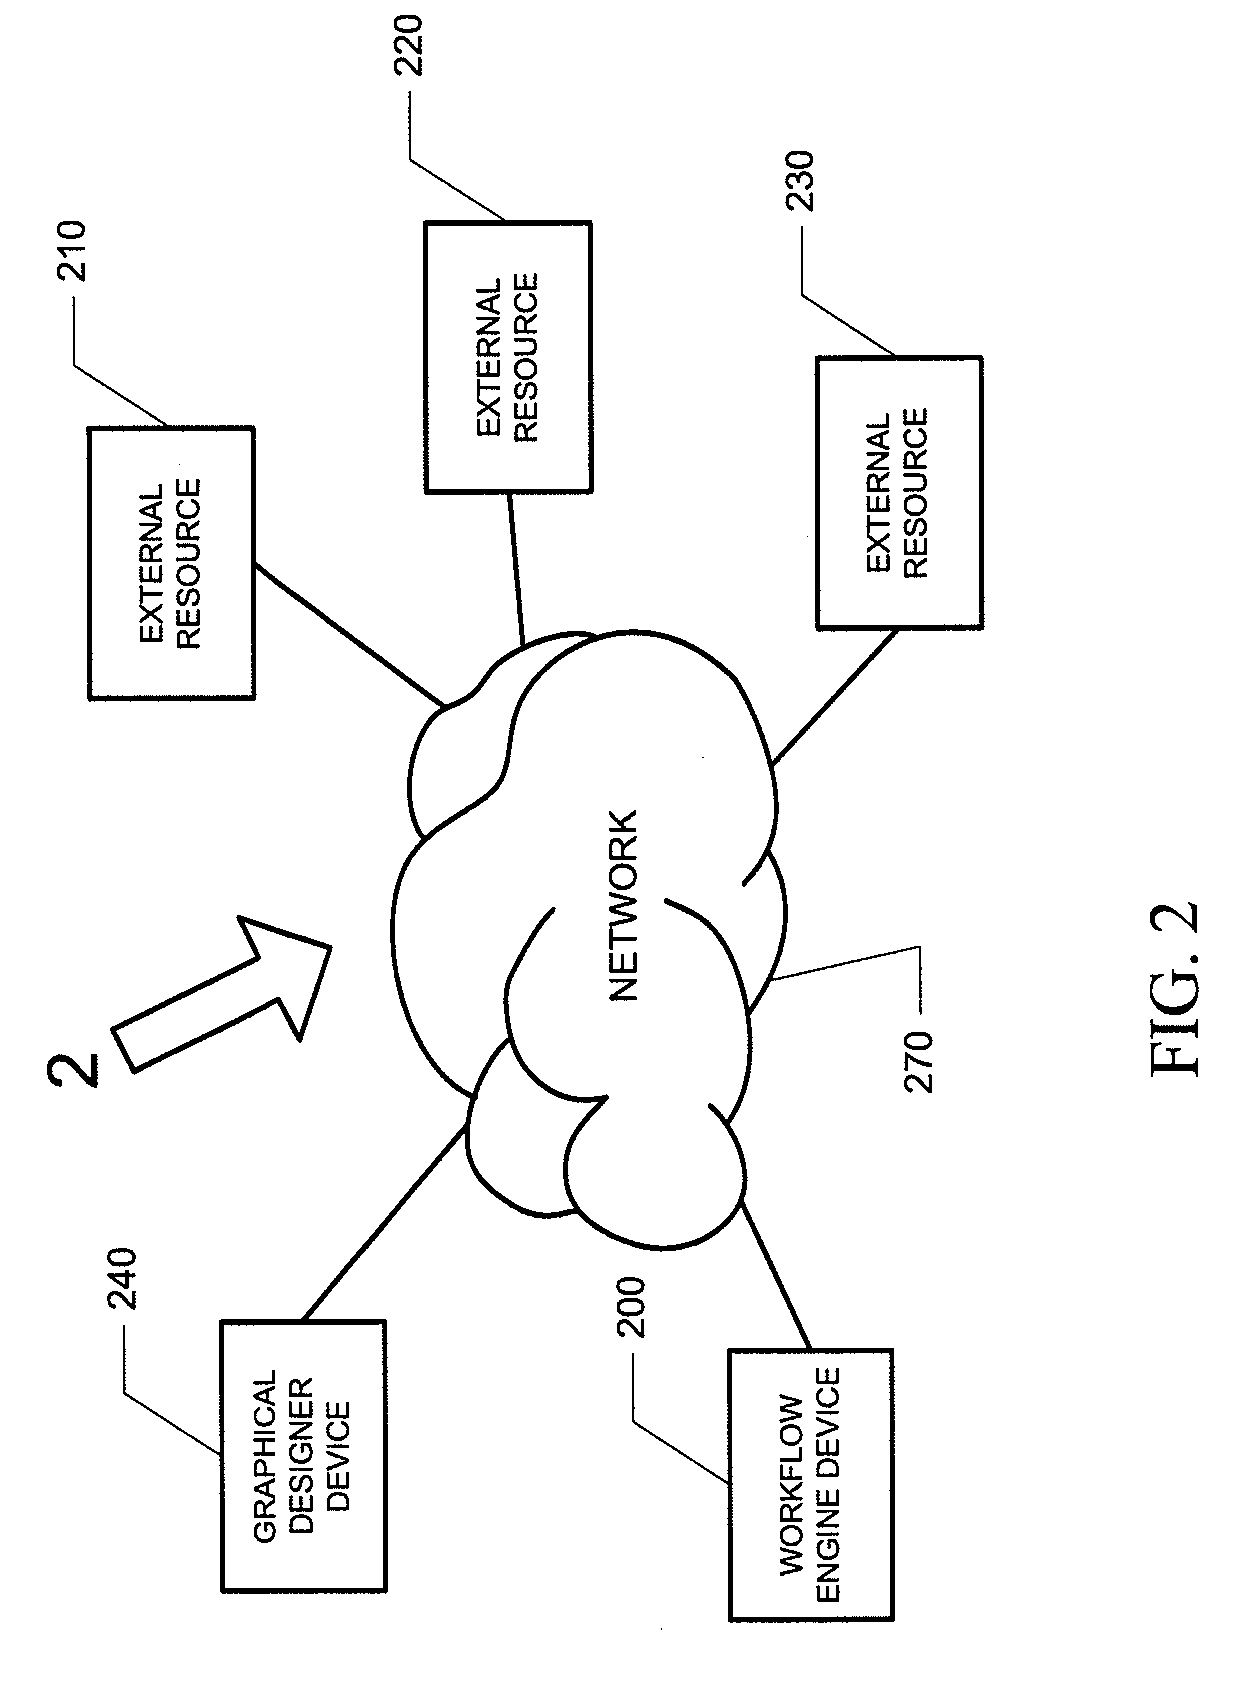 Systems and Methods for a Real-Time Workflow Platform